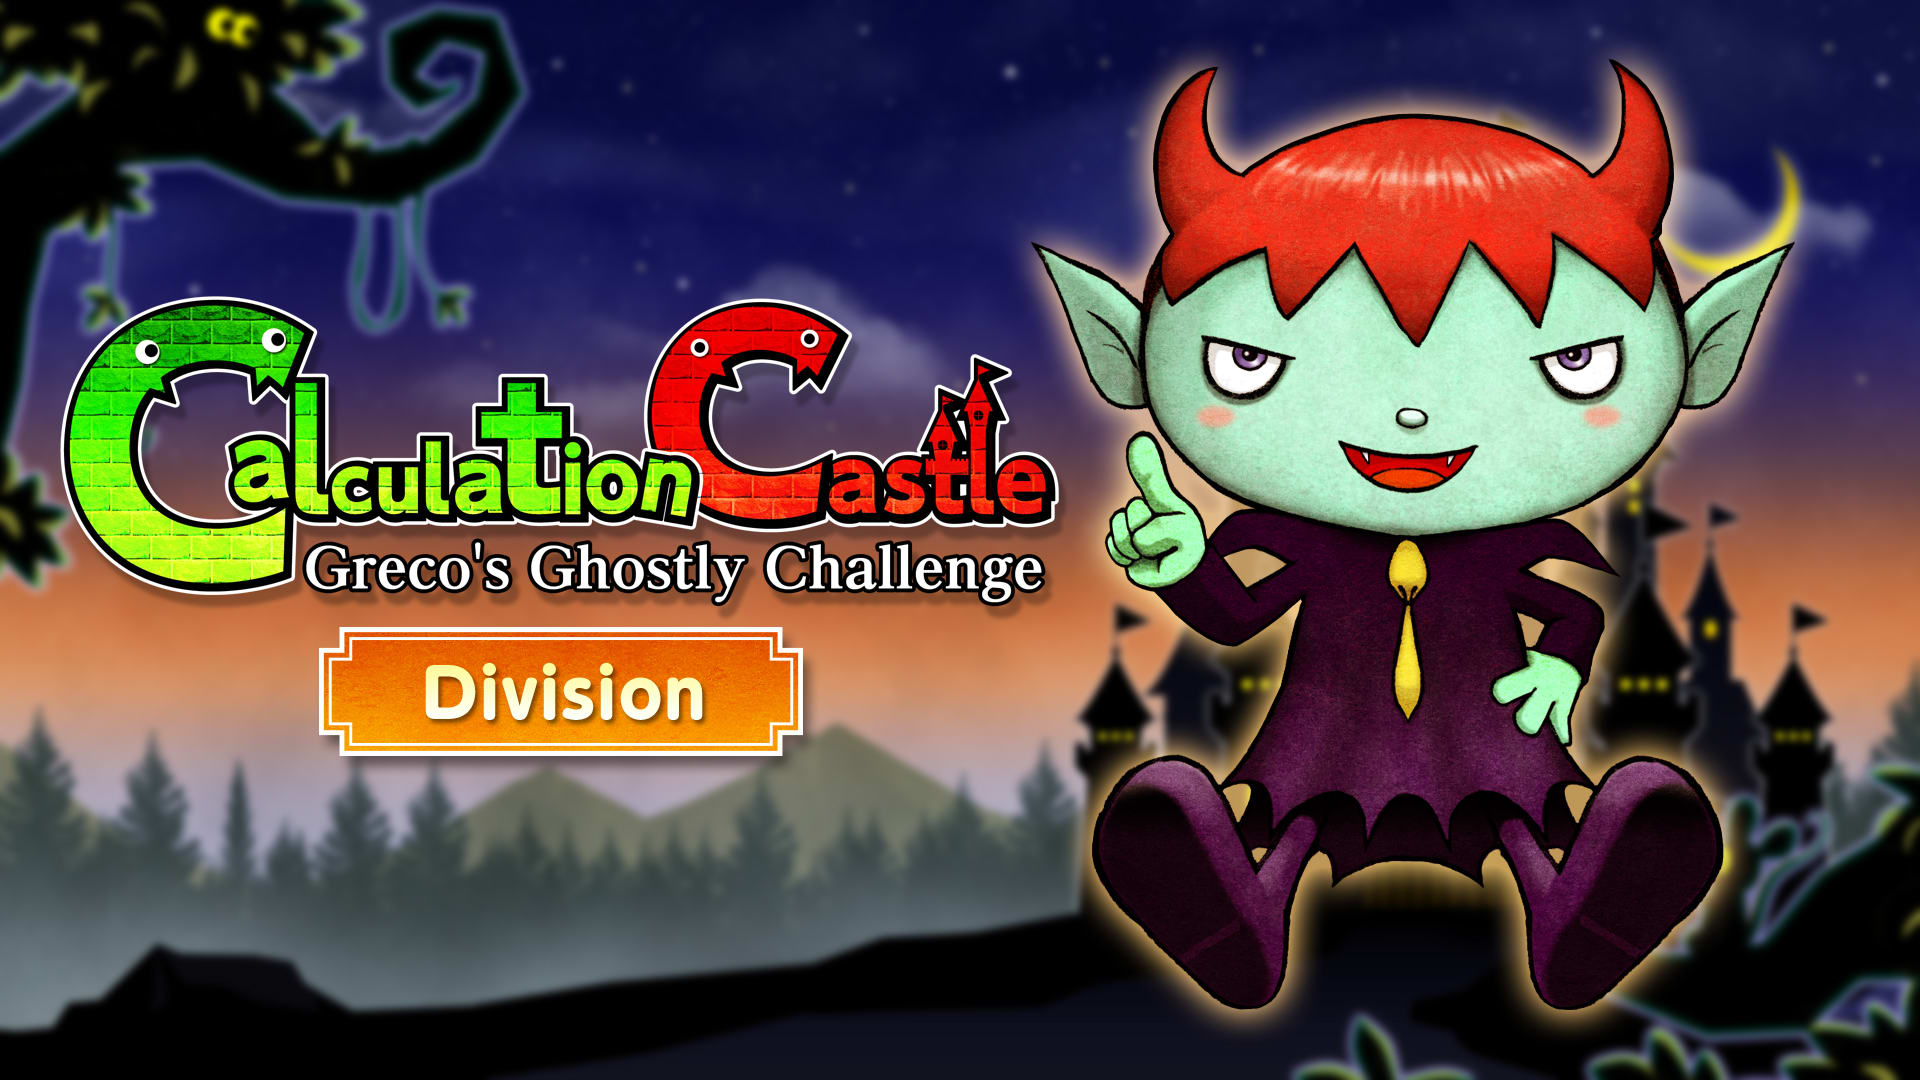 Calculation Castle : Greco's Ghostly Challenge "Division "